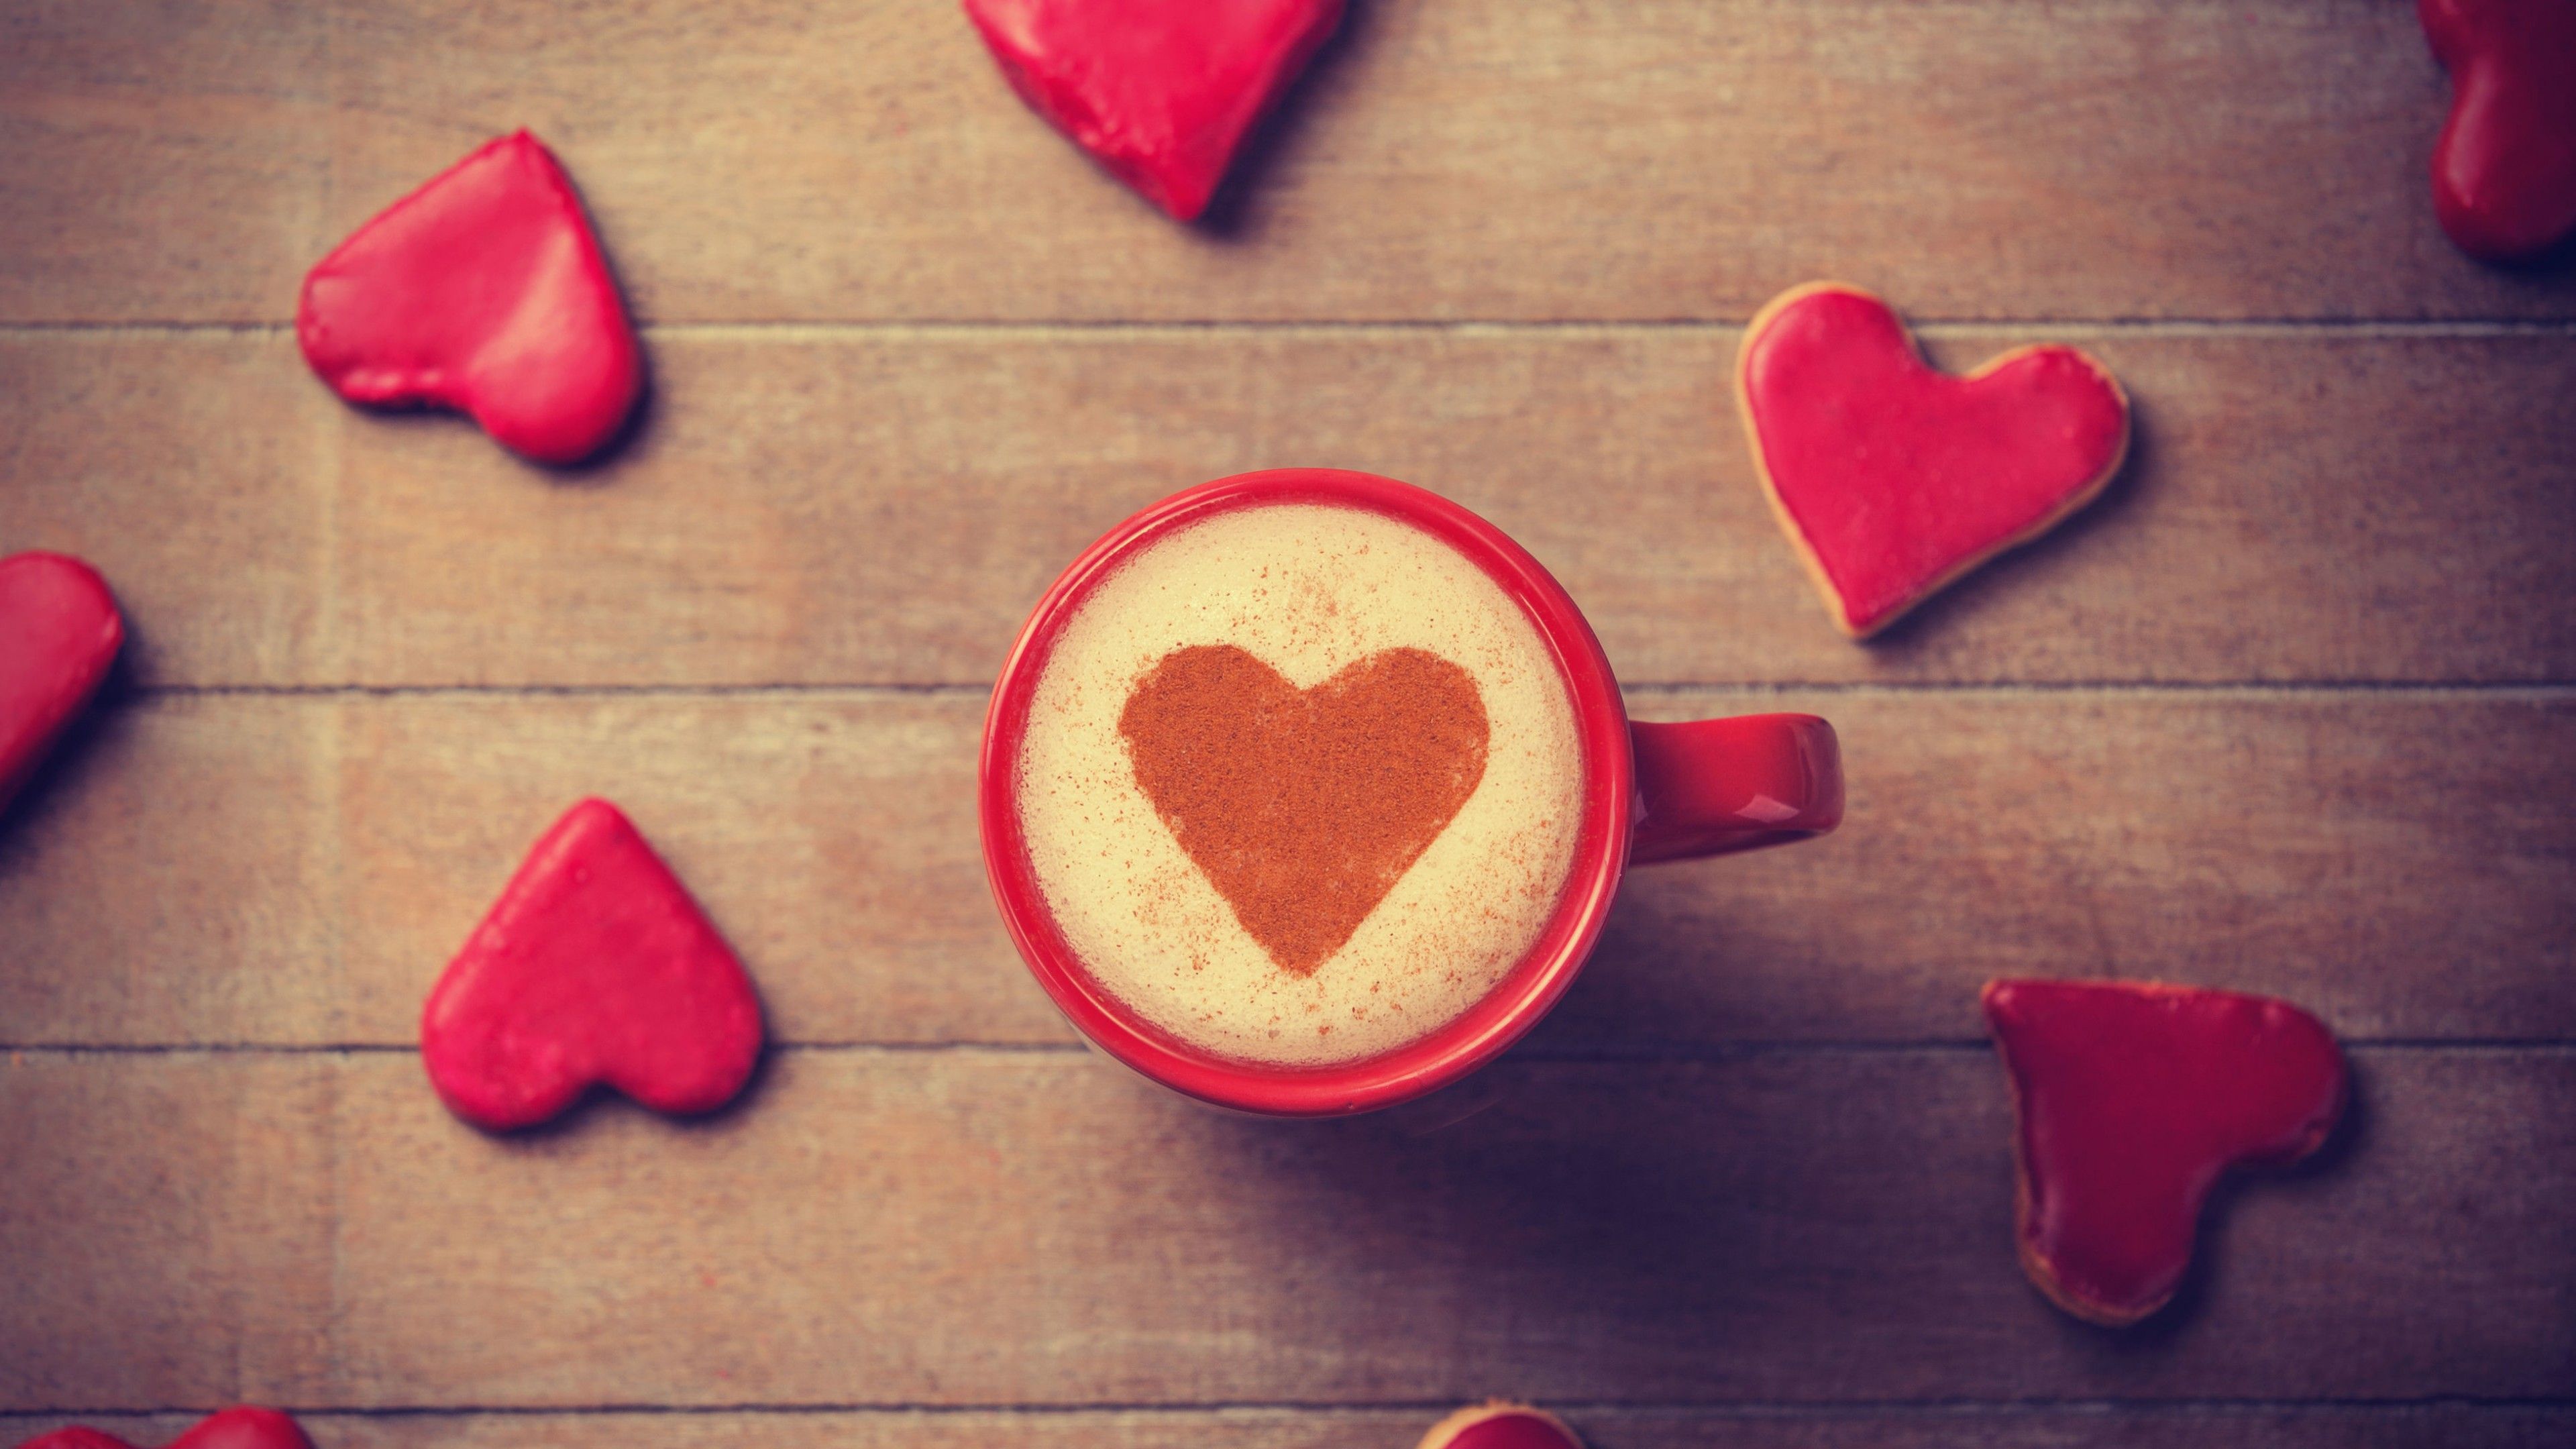 Wallpaper Valentine's Day, love, gift, romance, heart, cup, sign, coffee, crema, Food